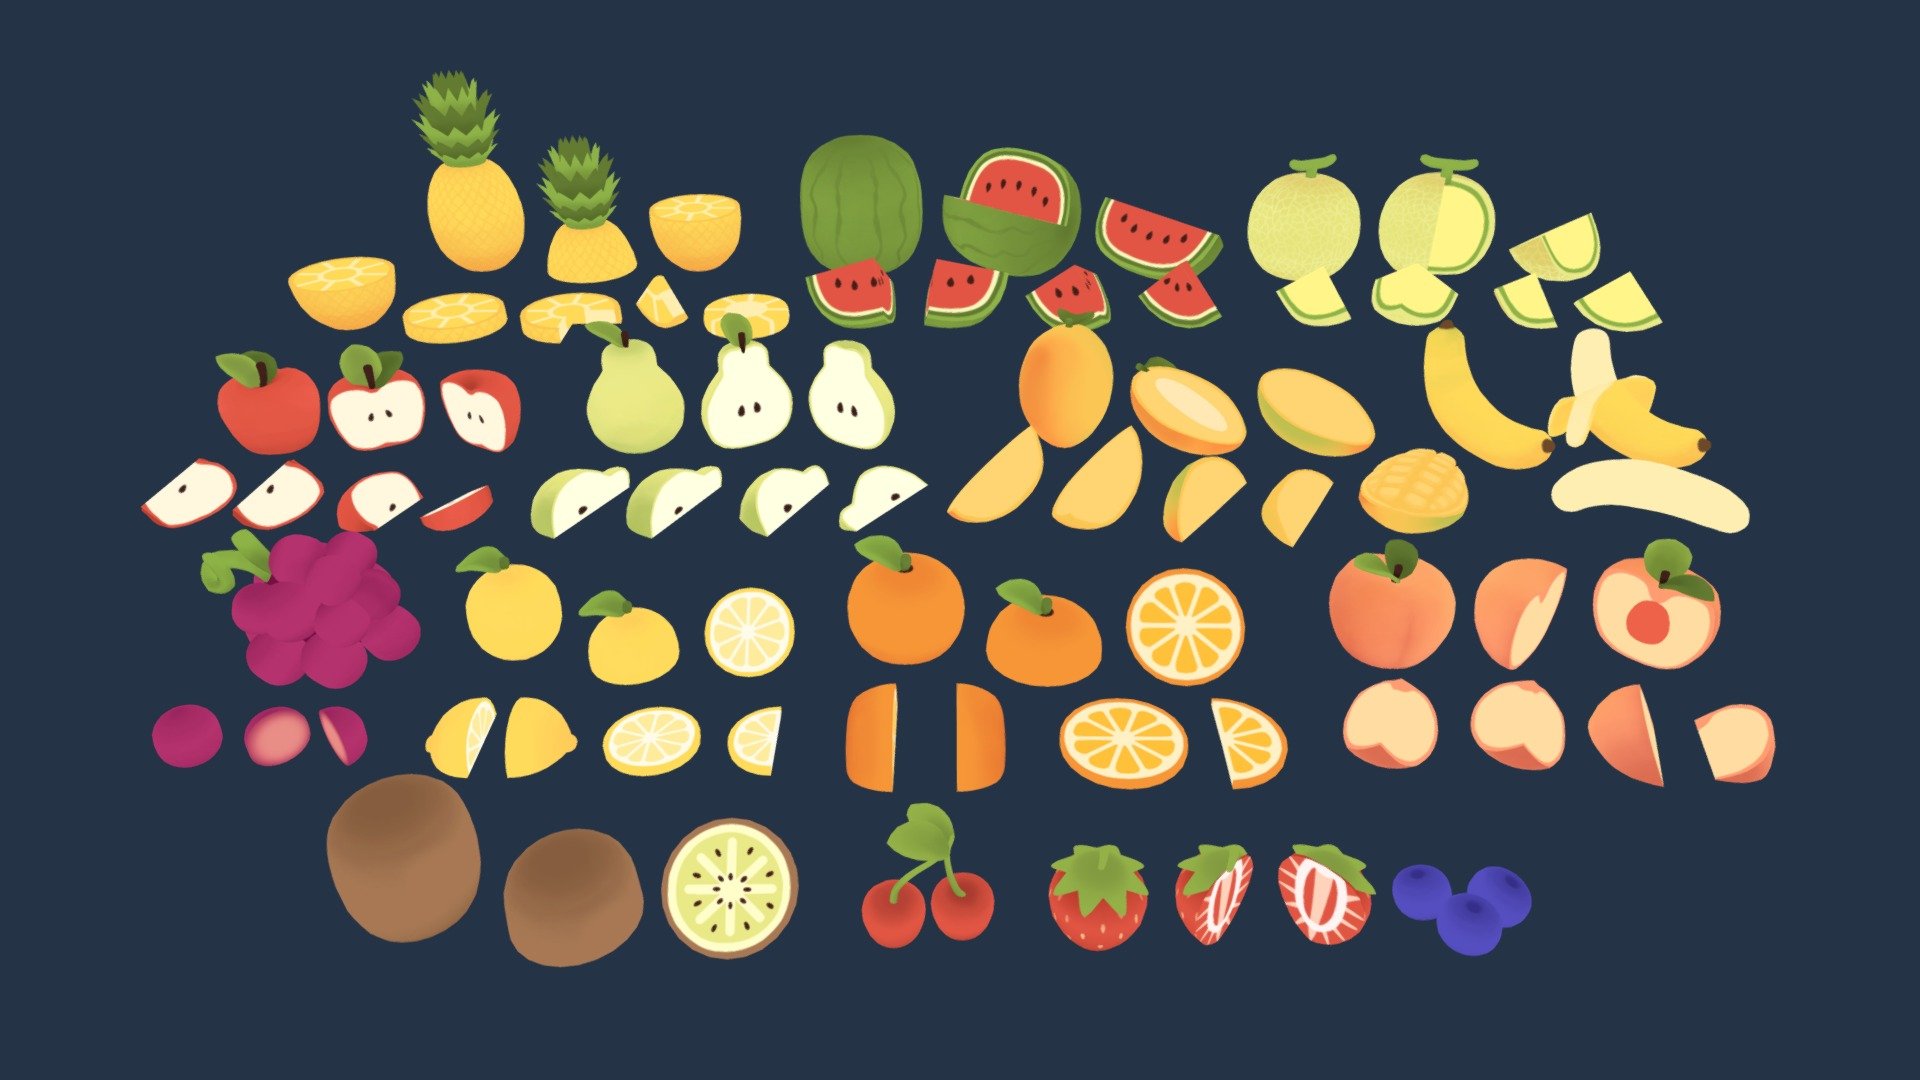 The Cute Fruits pack by PIXELATEDCROWN!

🍎🍌🫐🍈🍒🍇🥝🍋🥭🍊🍑🍐🍍🍓🍉


Cute, simple fruit models with a colorful, cartoon style 👑✨

You can get the apple model from the pack free here 🍎


15 different fruits, with most having sperated sliced models - 80 models in total!
28 texture .pngs

Zip file contains each fruit as their own .fbx file, as well as an .fbx of all the fruit together - Cute Fruits Pack - Buy Royalty Free 3D model by pixelatedcrown 3d model